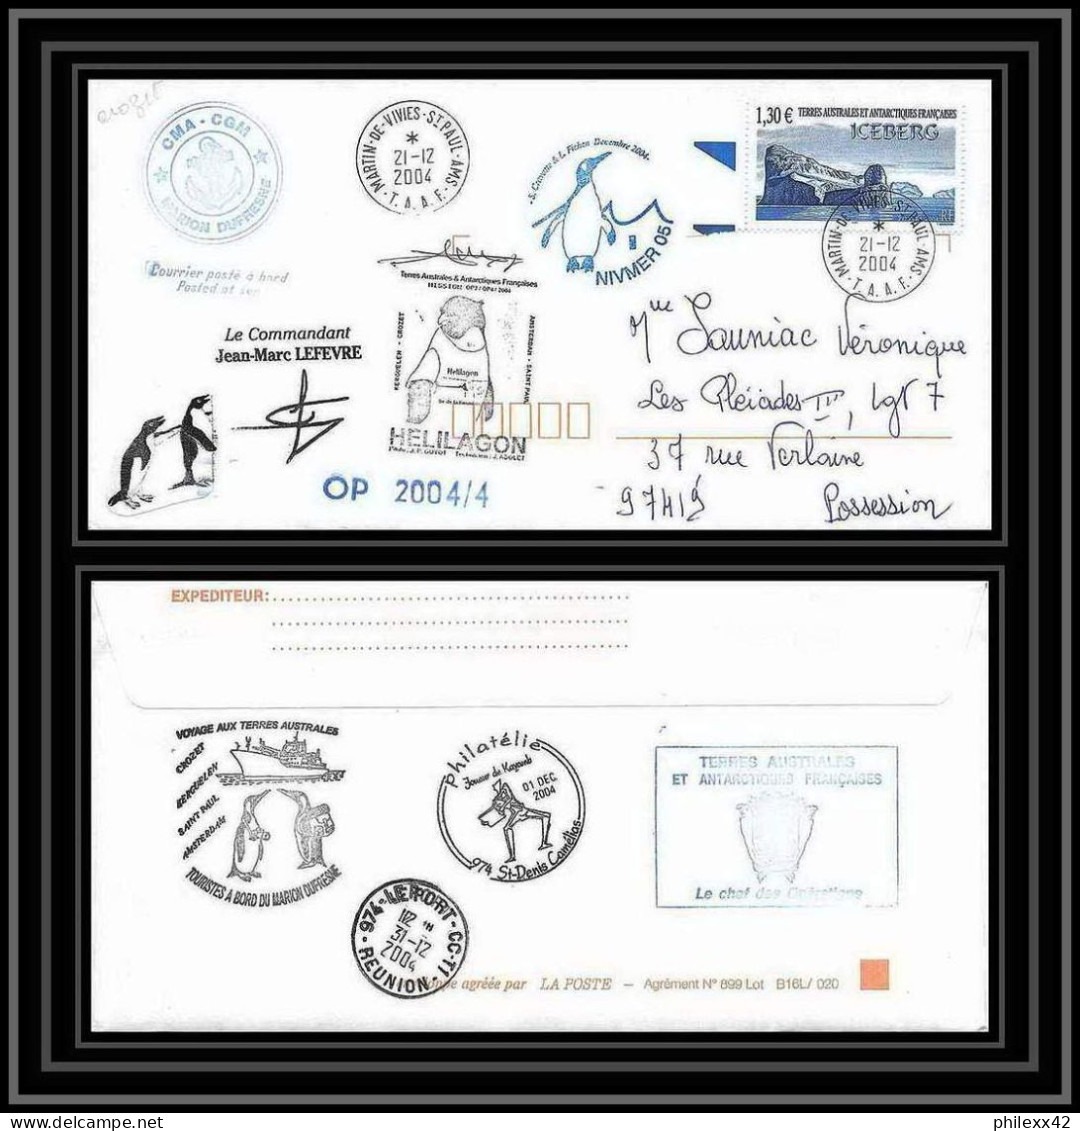 2485 ANTARCTIC Terres Australes TAAF Lettre Cover Dufresne 2 Signé Signed OP 2004/4 N°387 21/12/2004 Helilagon - Elicotteri